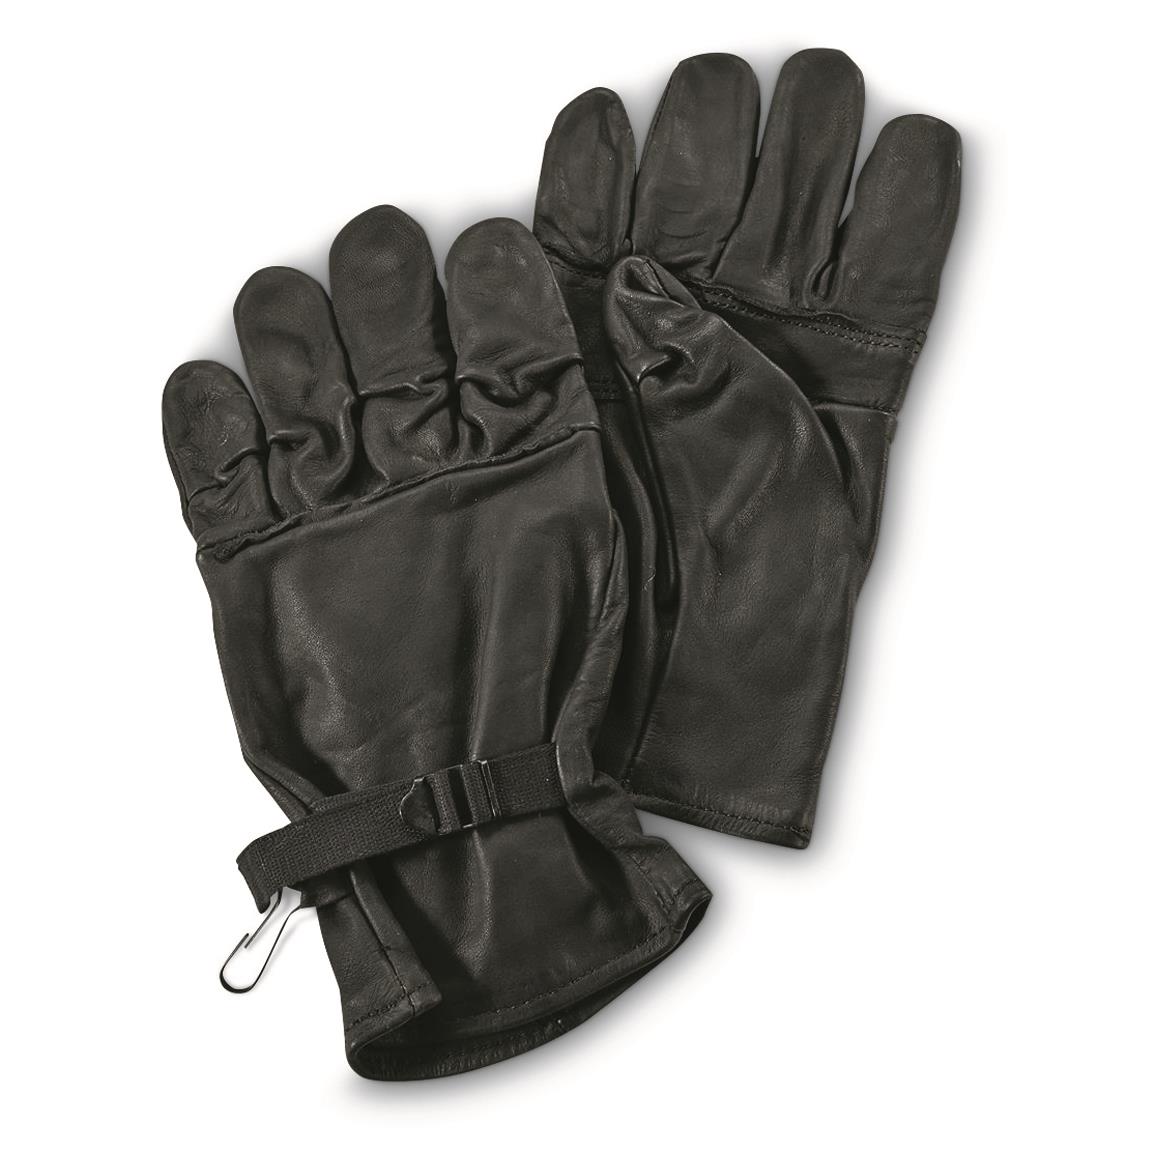 U.S. Military Style D3A Gloves, Black